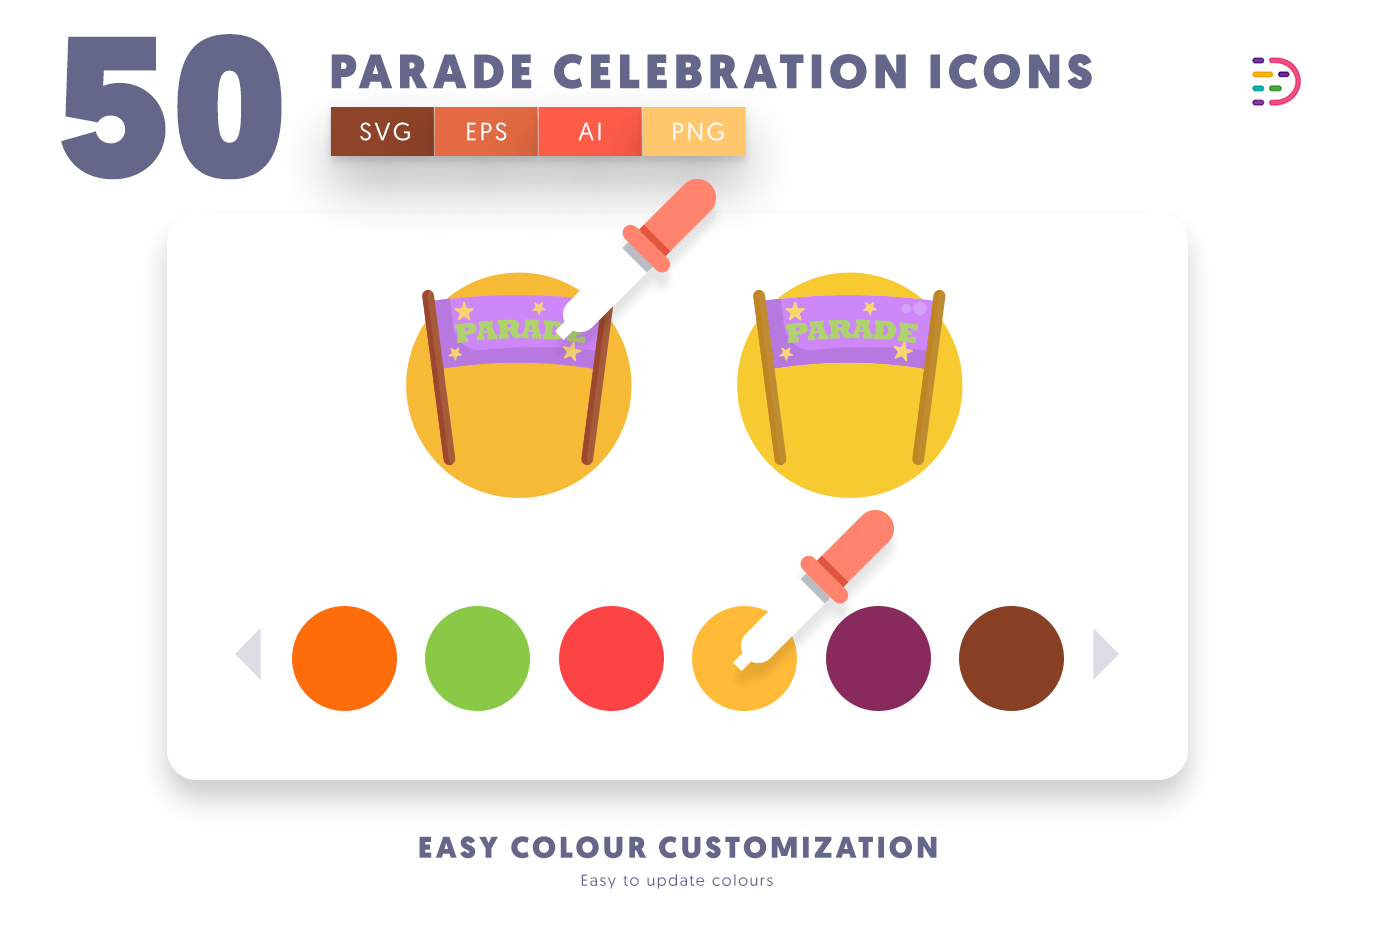 Customizable and vector 50 Parade Celebration Icons